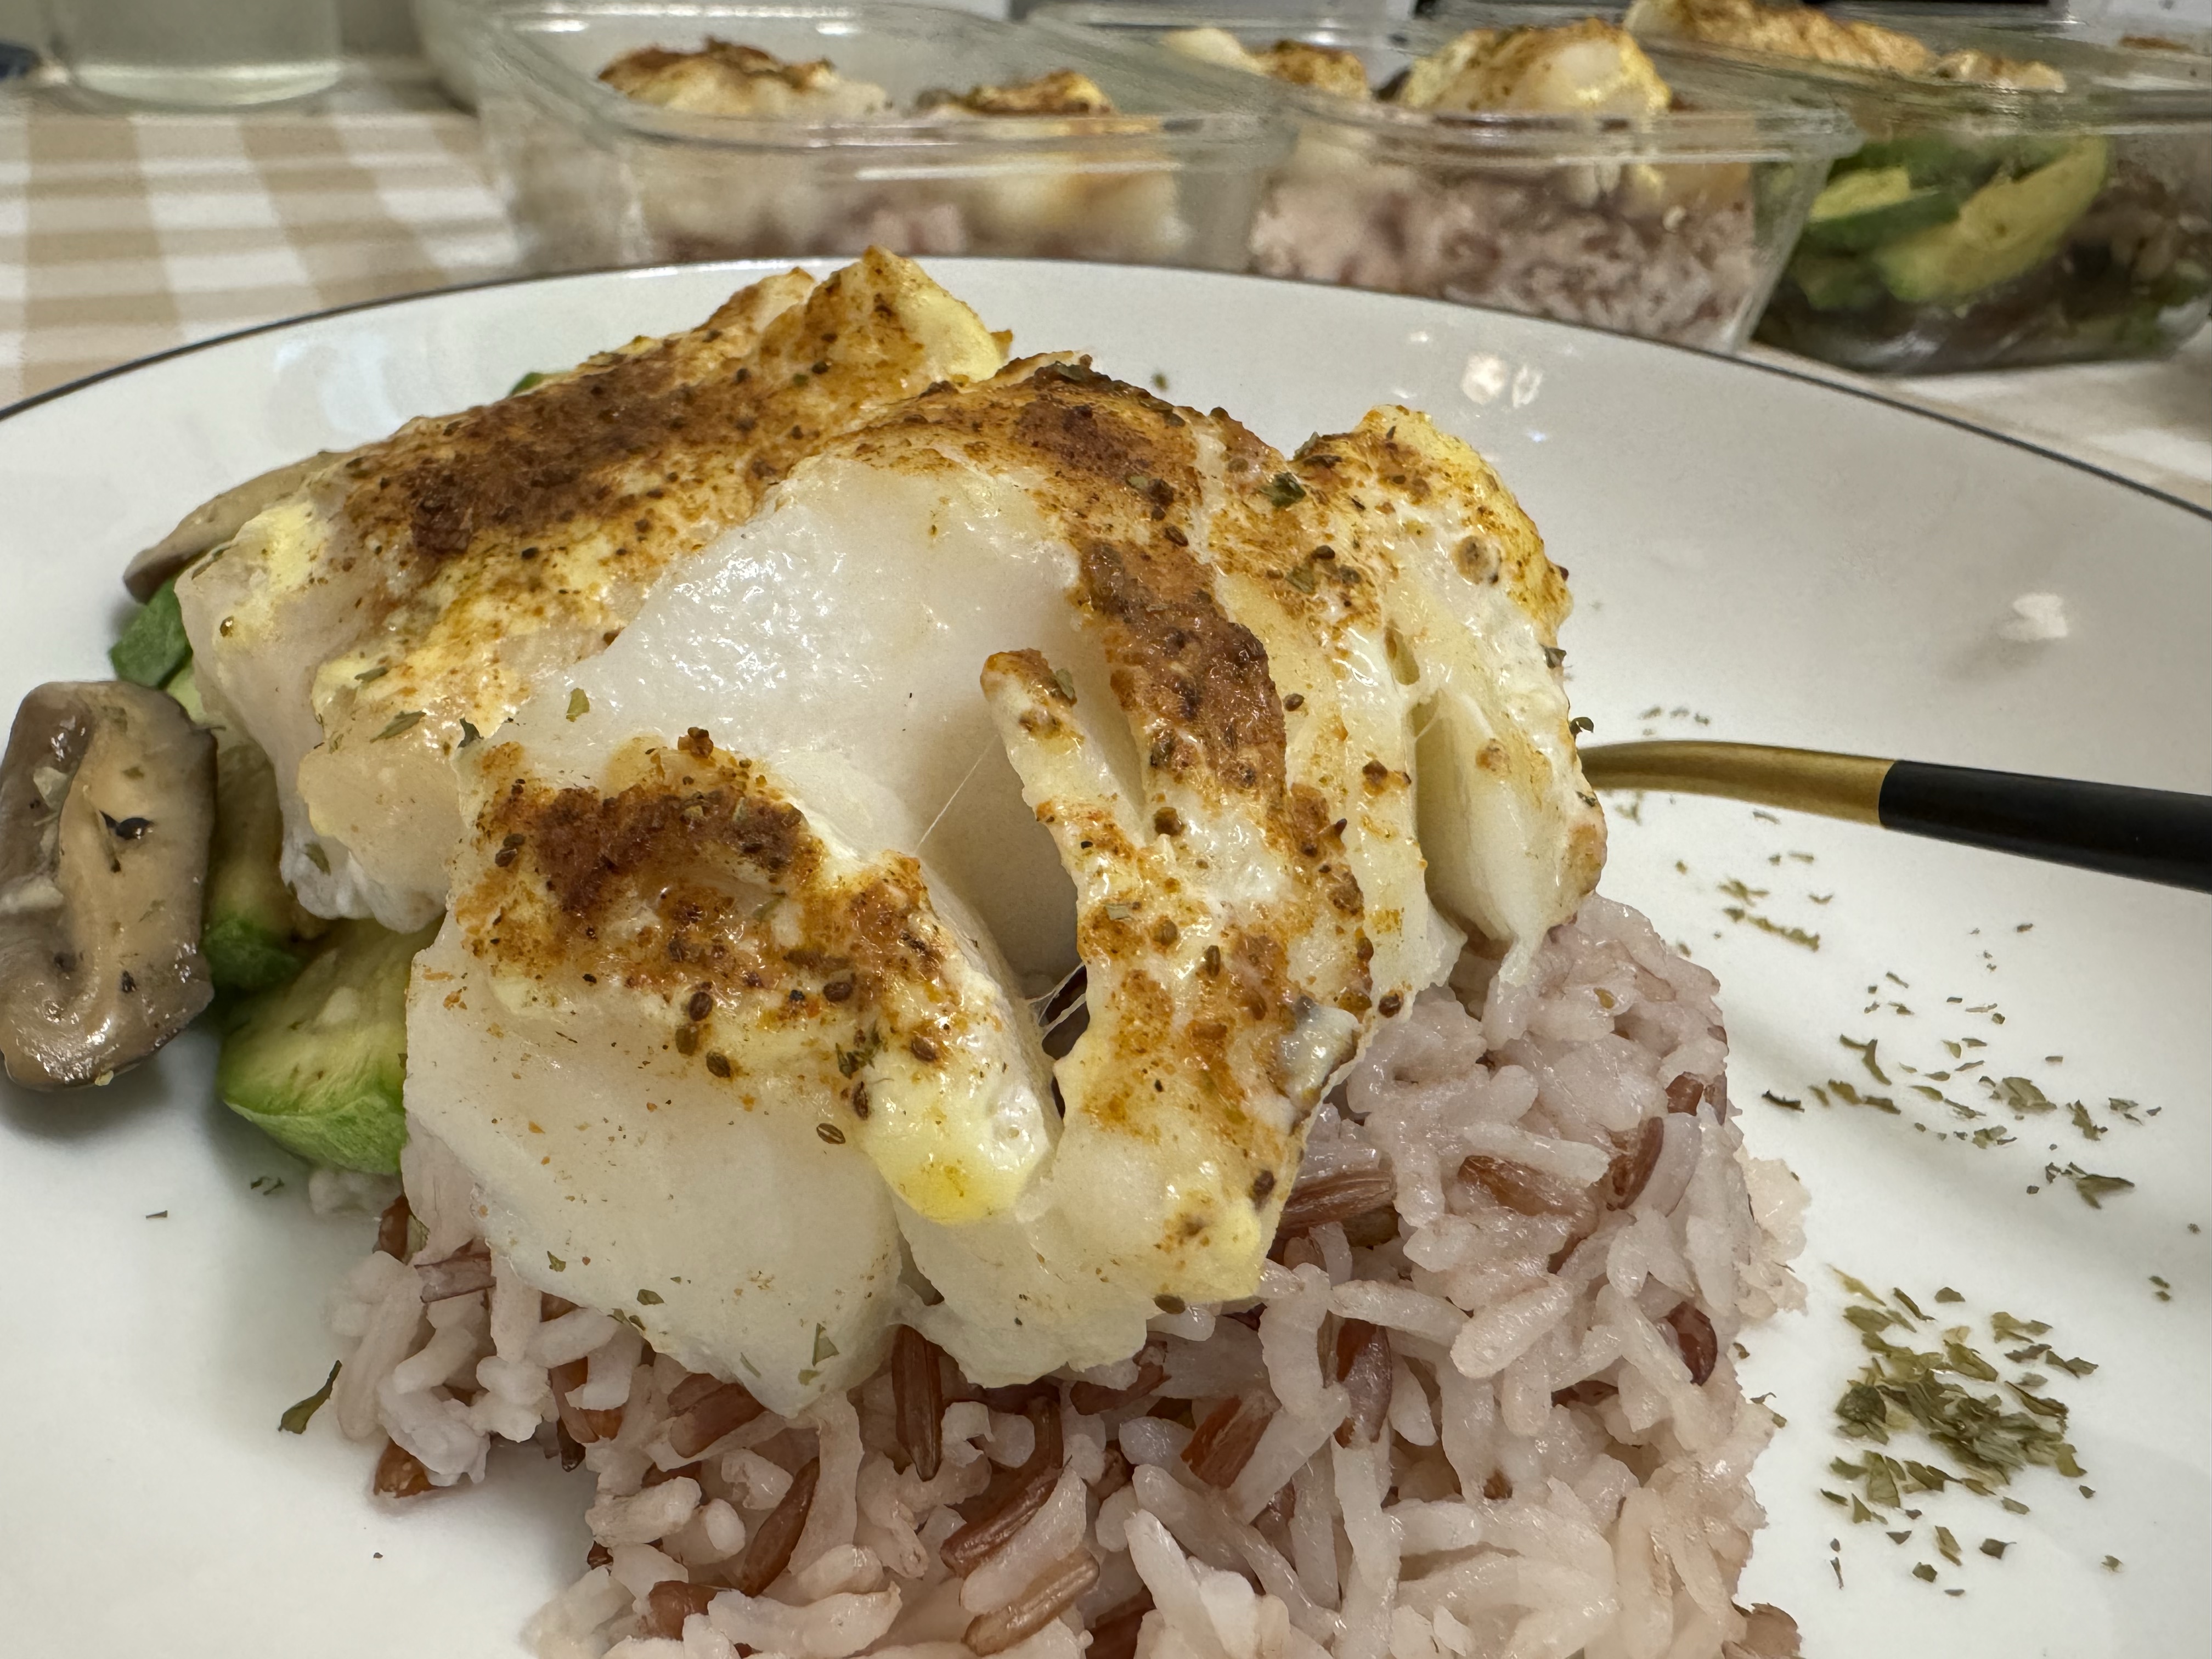 Baked Cod with Mayo and Old Bay Crust